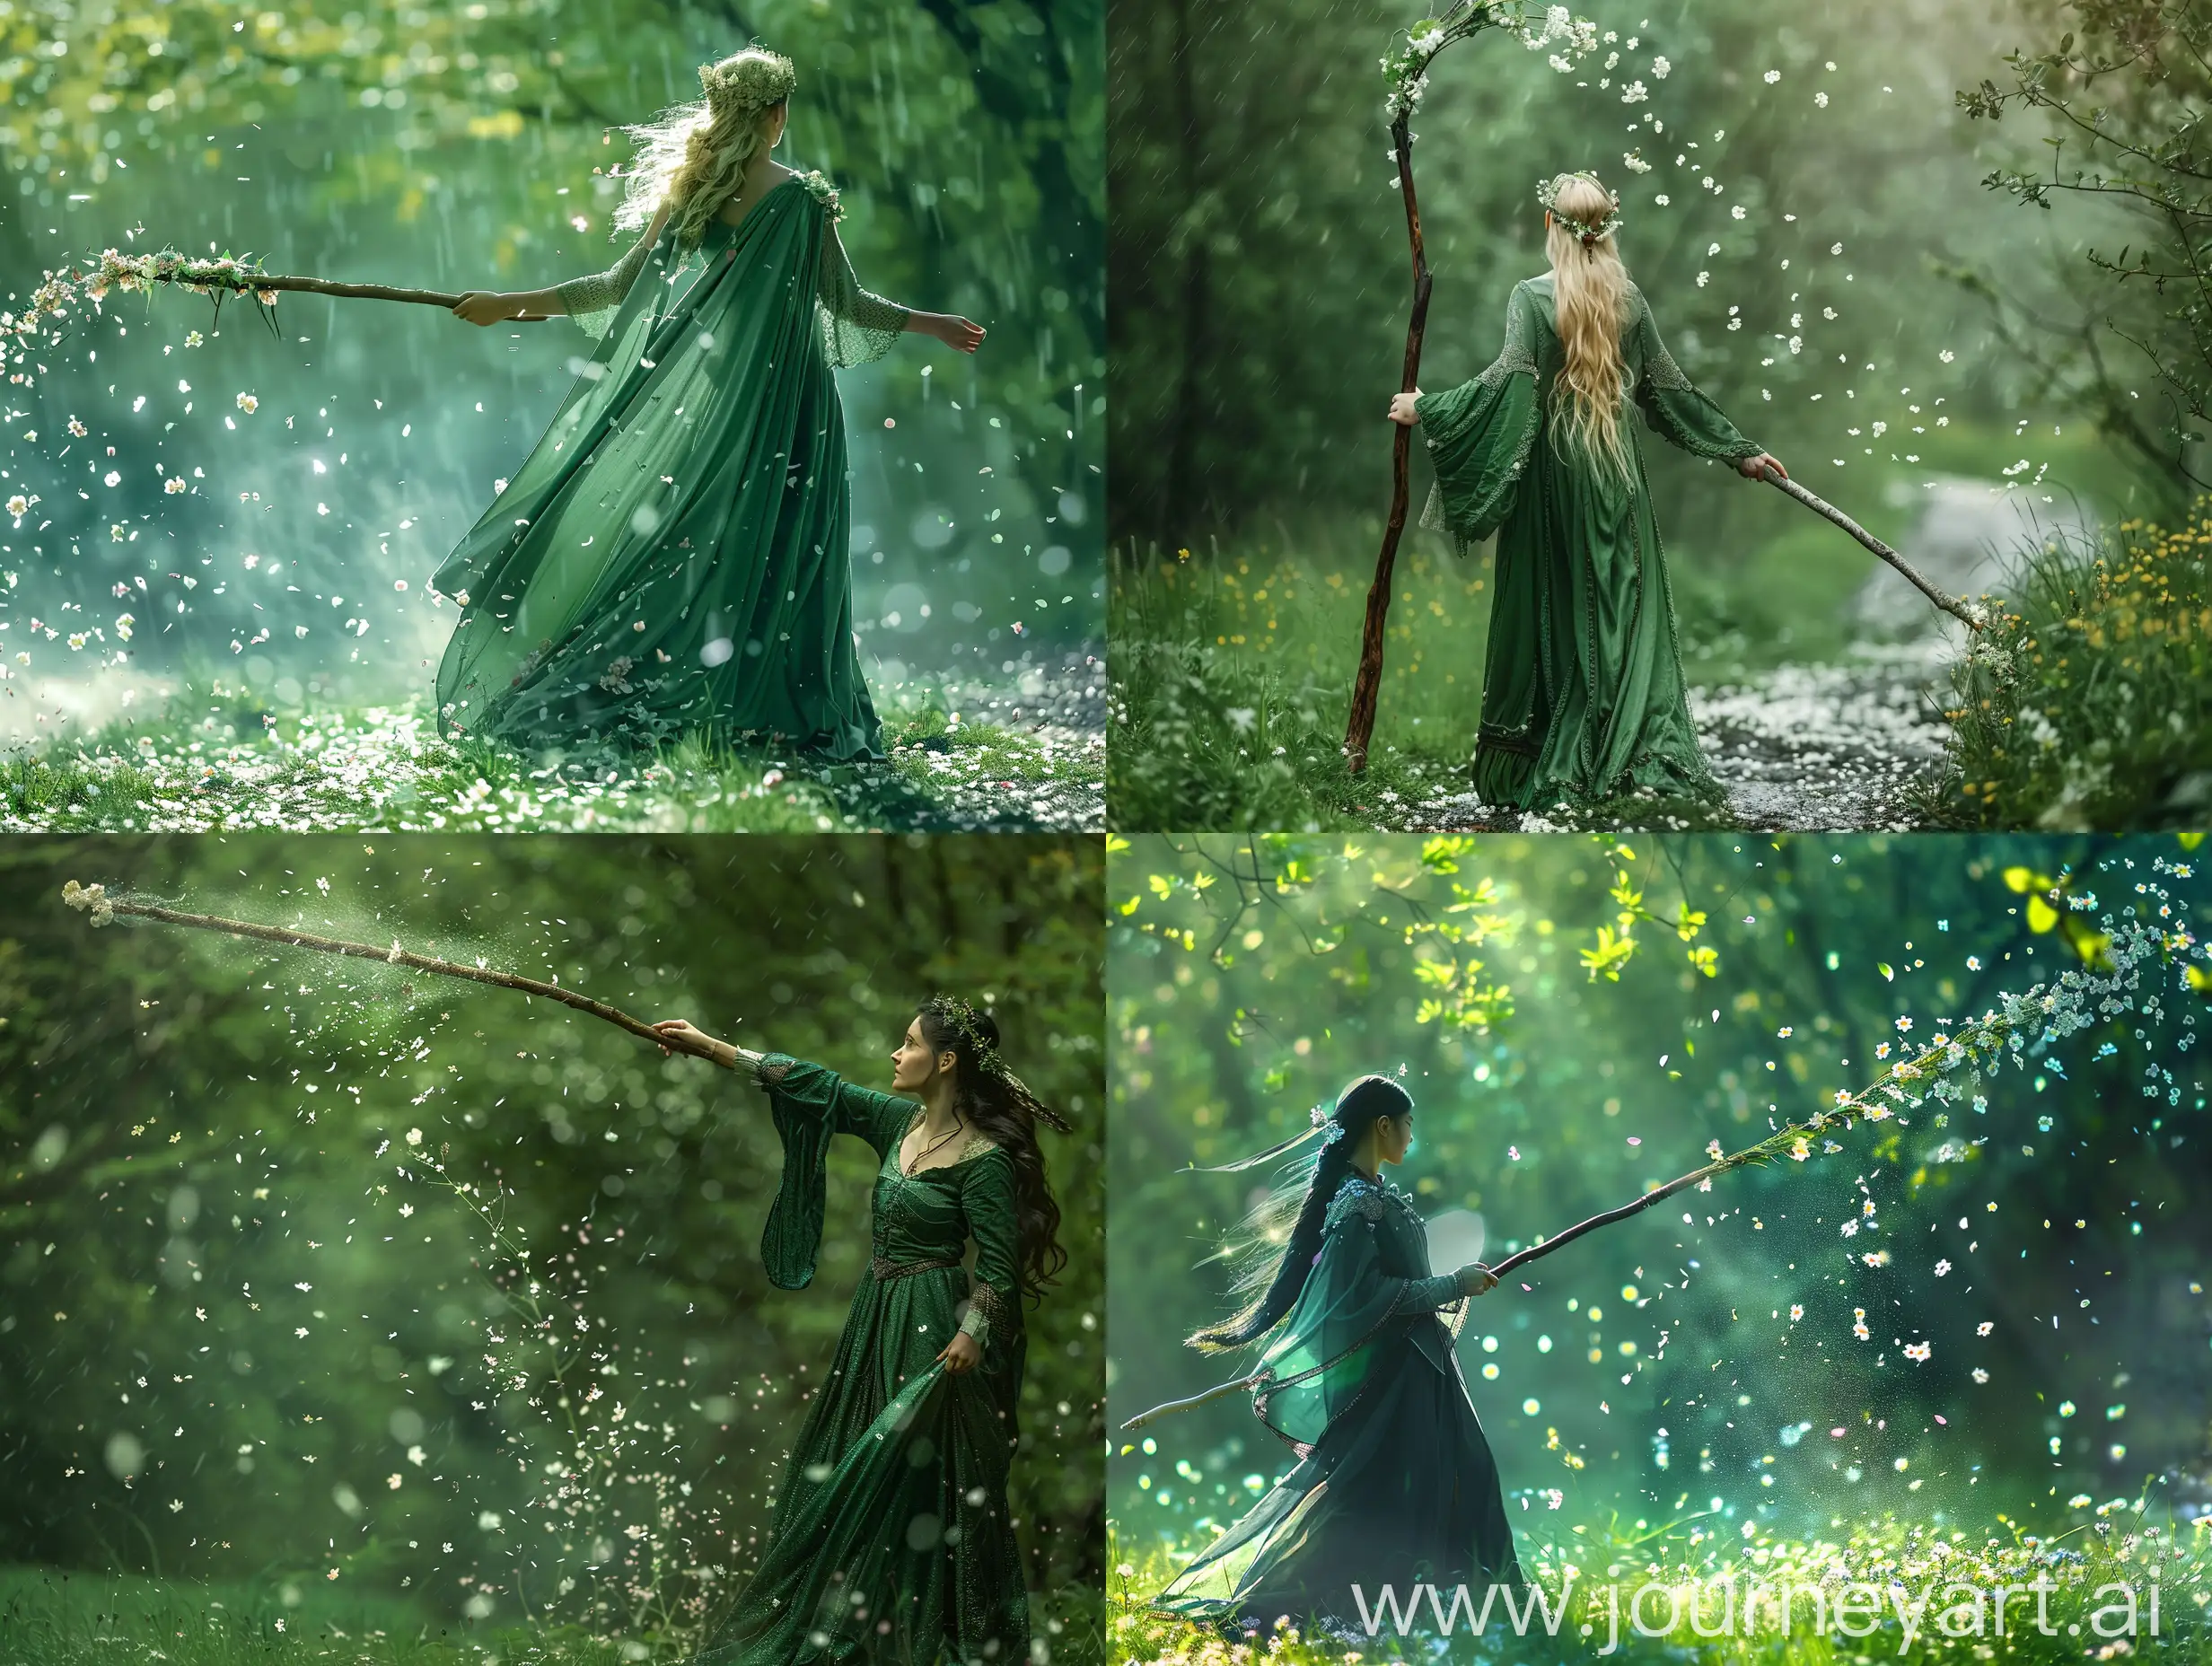 https://s8.uupload.ir/files/amu_nowruz_pnzs.jpg
Recreate this image in a spring, green and fantasy atmosphere while holding a long magical staff and raining flowers on the ground with it.